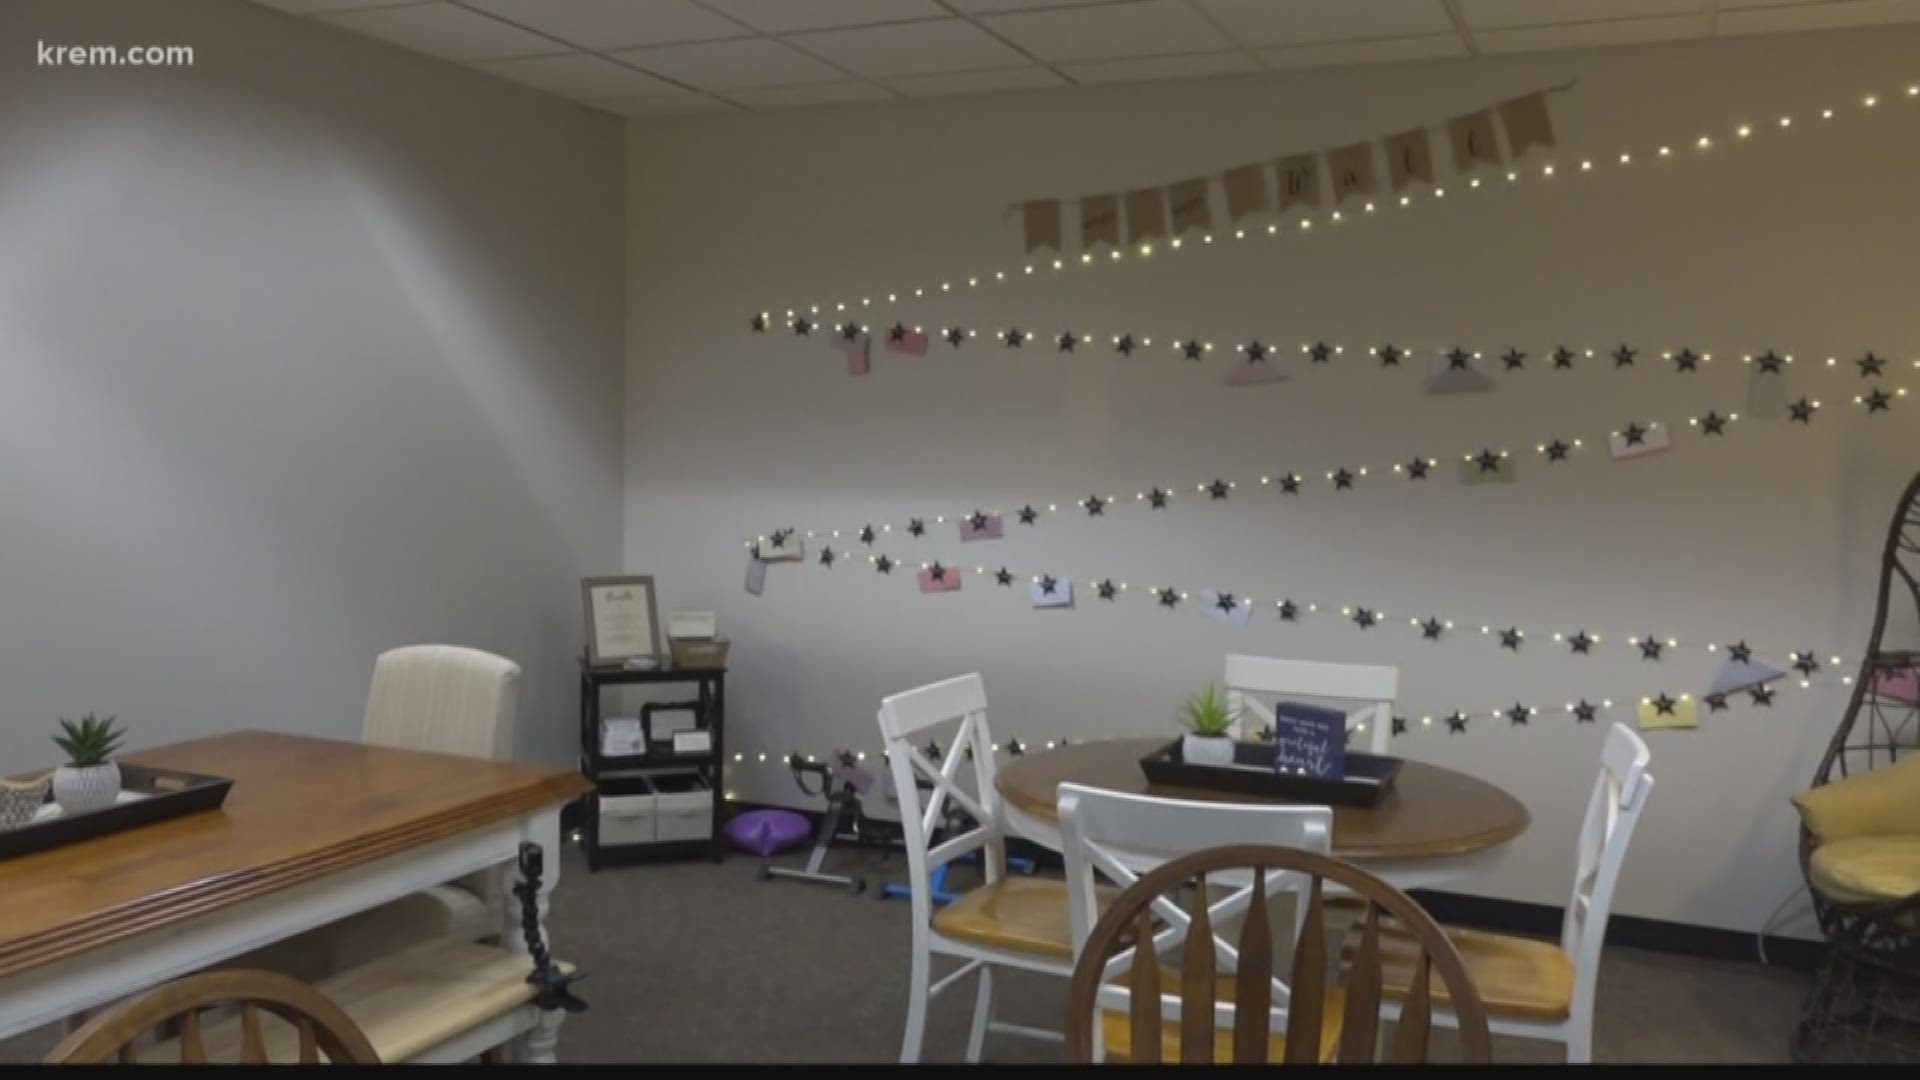 The school’s principal, Penny Capko, received a $1,500 grant and decided to pair up with some teachers to give the room a fresh, cozy feel.